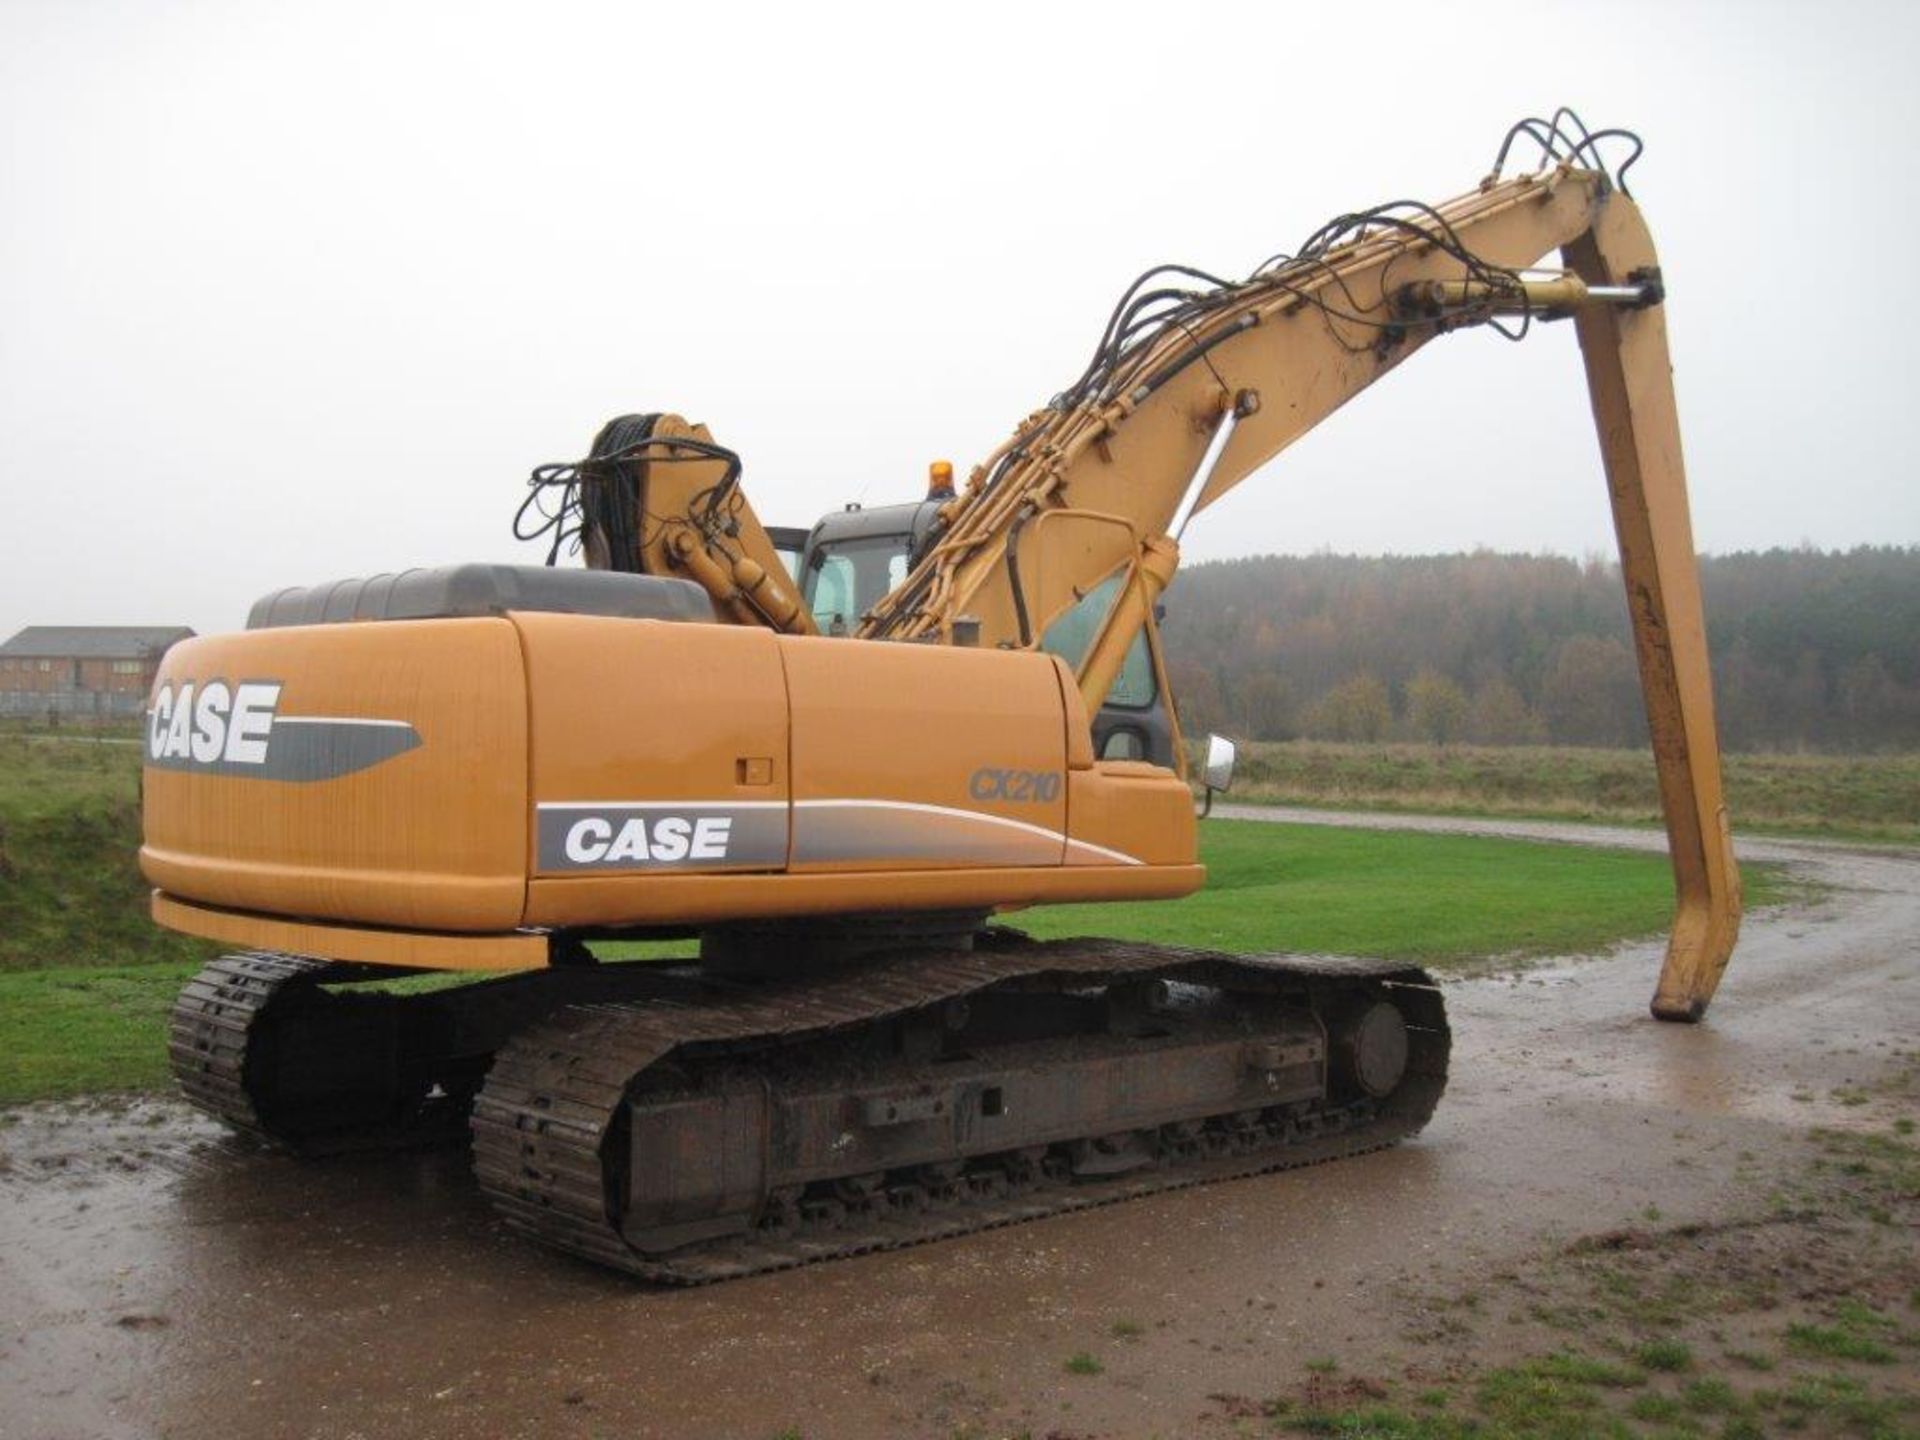 Case CX210 Tracked Rehandler 2007.
Very good condition, hydraulic high rise cab, very good tracks